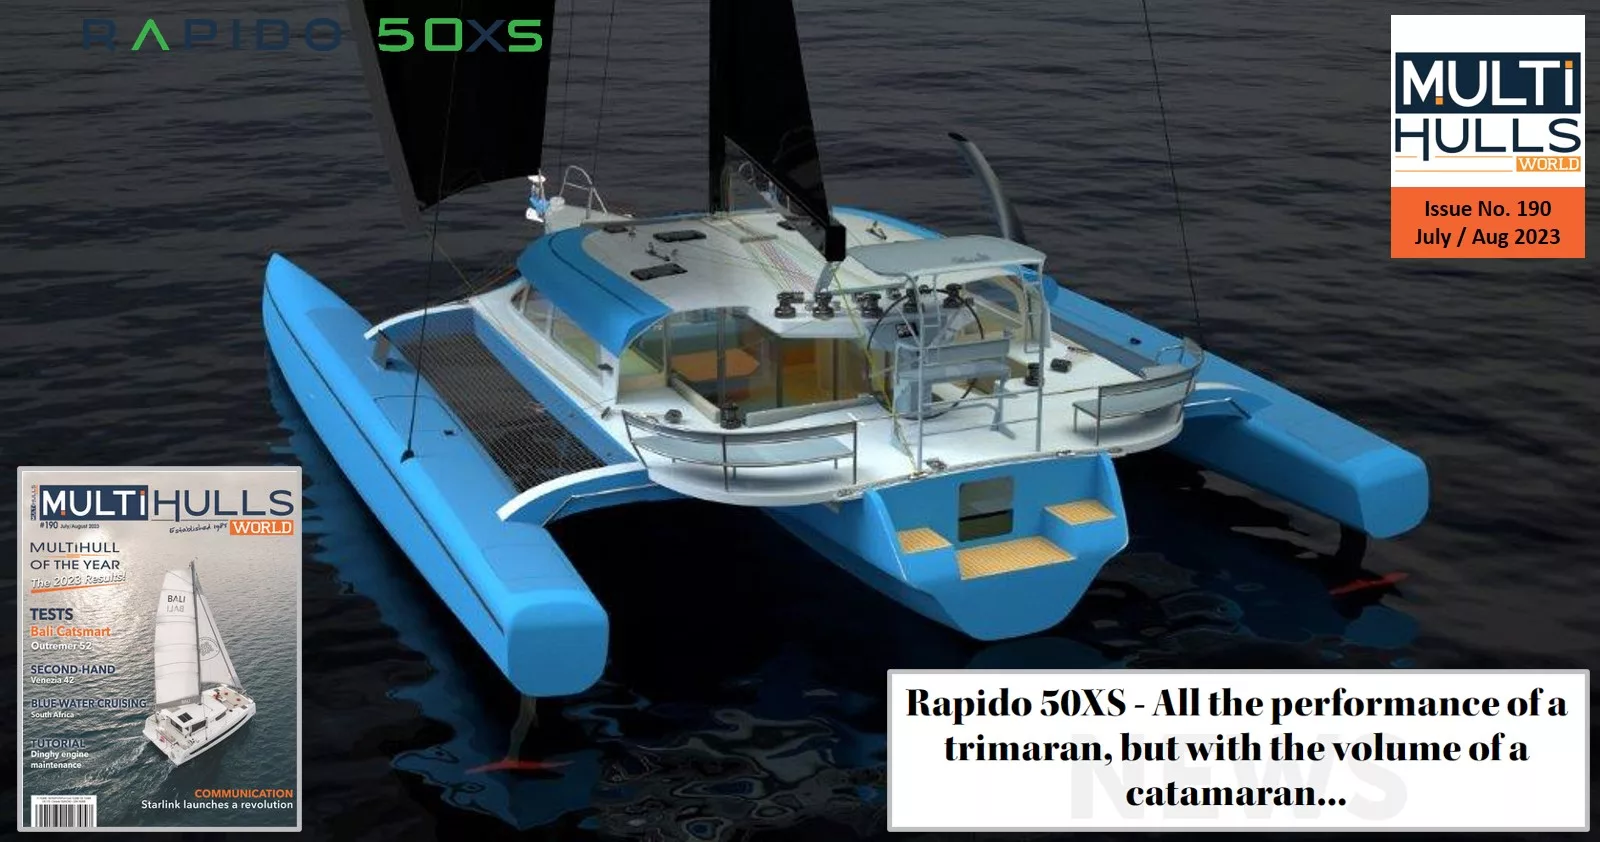 Rapido 53XS: The performance of a trimaran, but with the volume of a catamaran, writes Multihulls World magazine